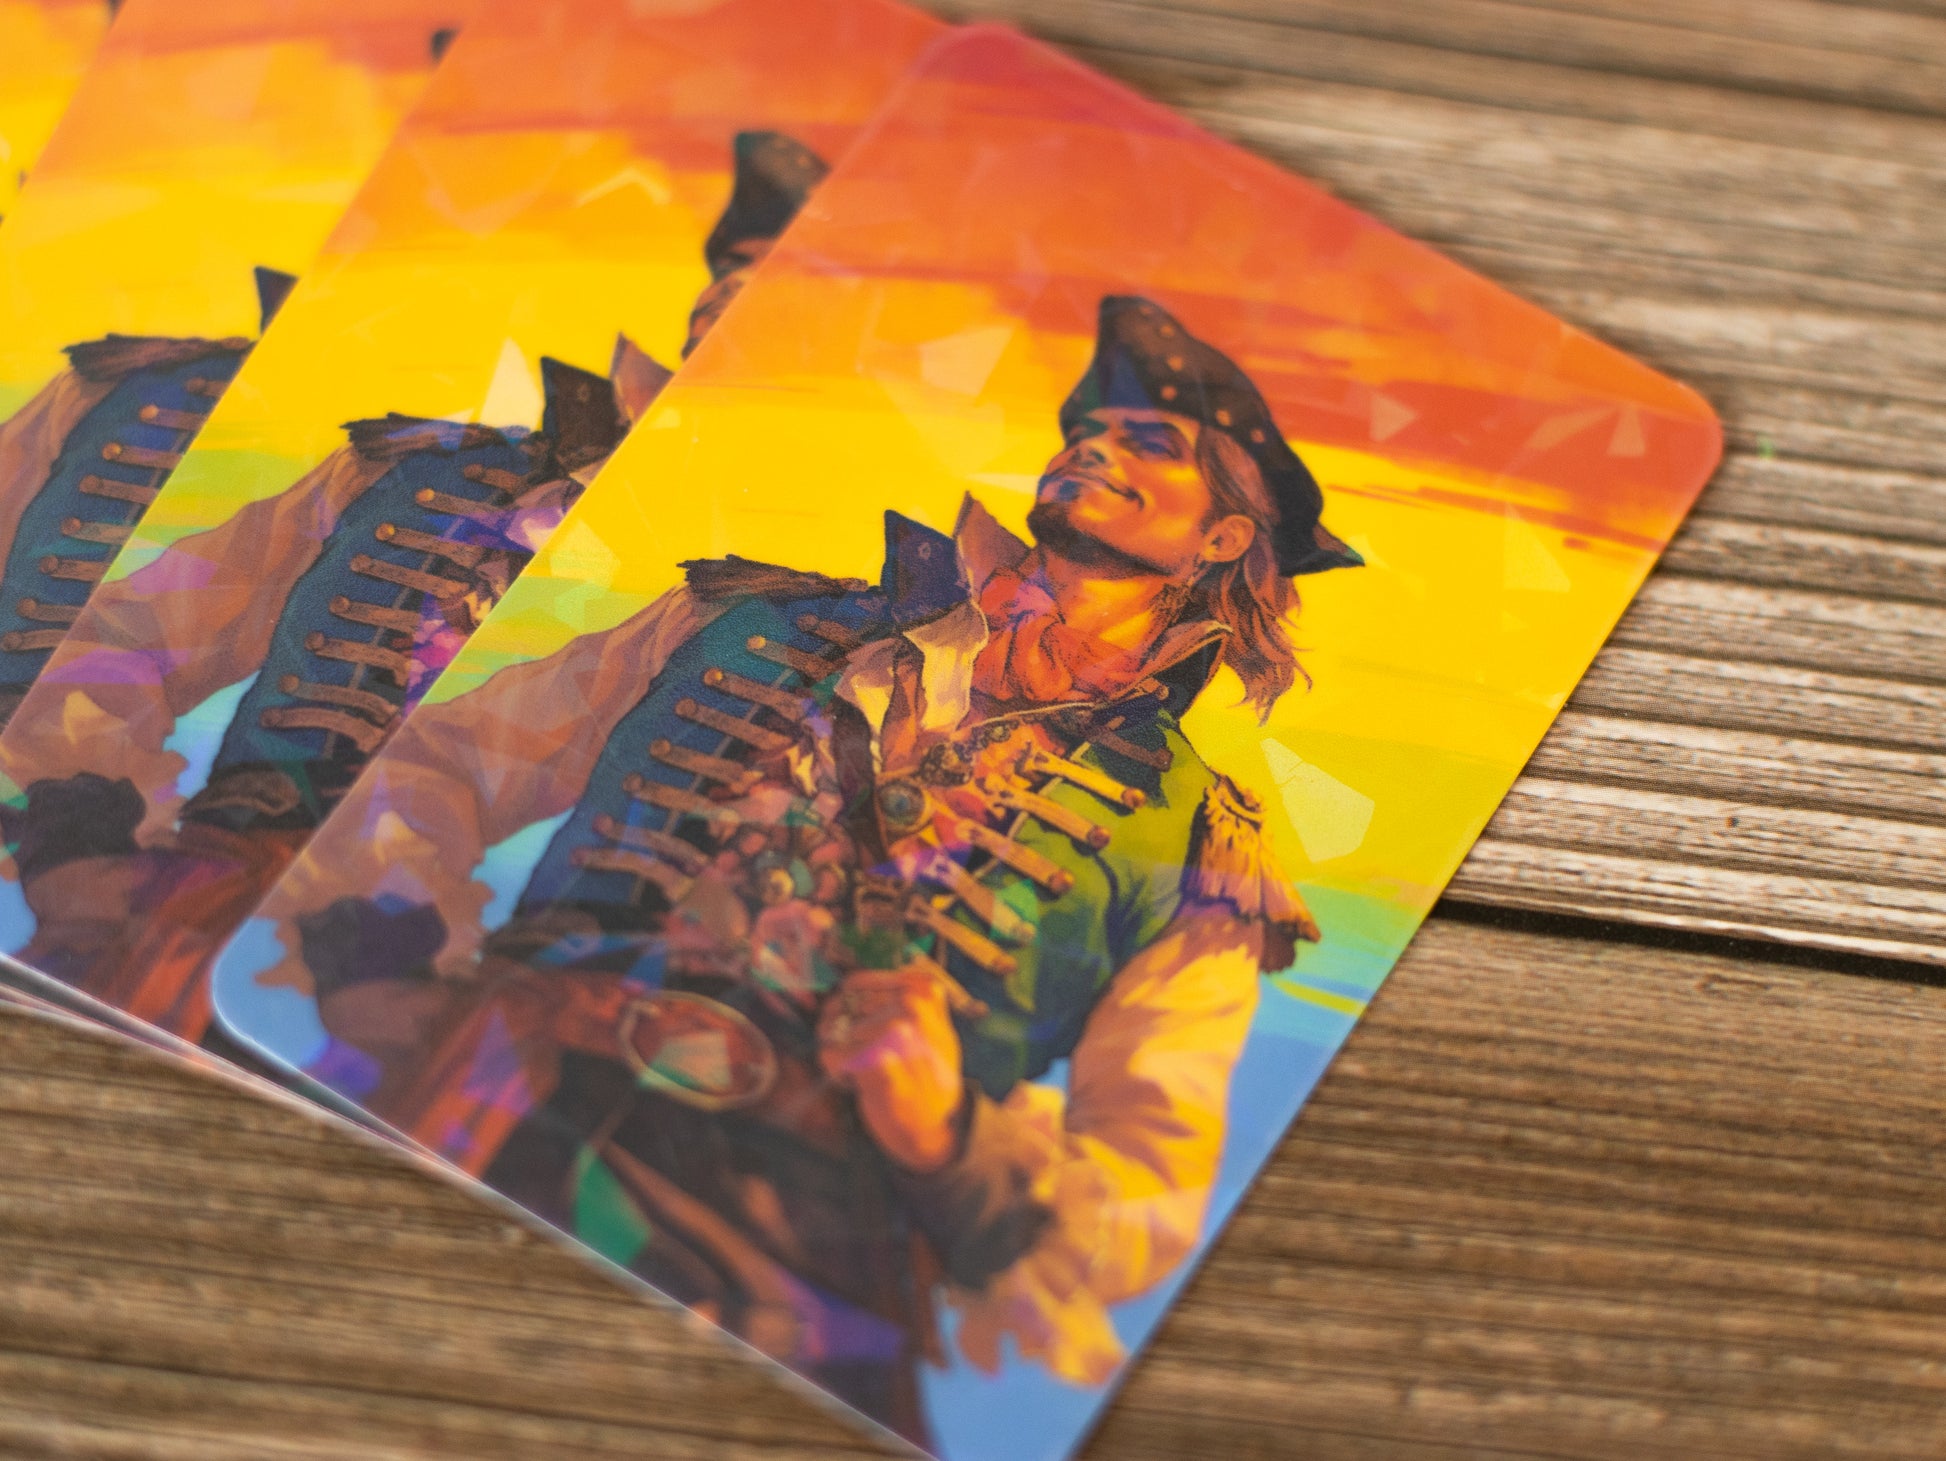 Pirates of the Caribbean playing cards featuring the Novae Caelum LGBT Pride Rainbow Gay Pirate Holographic Vinyl Sticker.